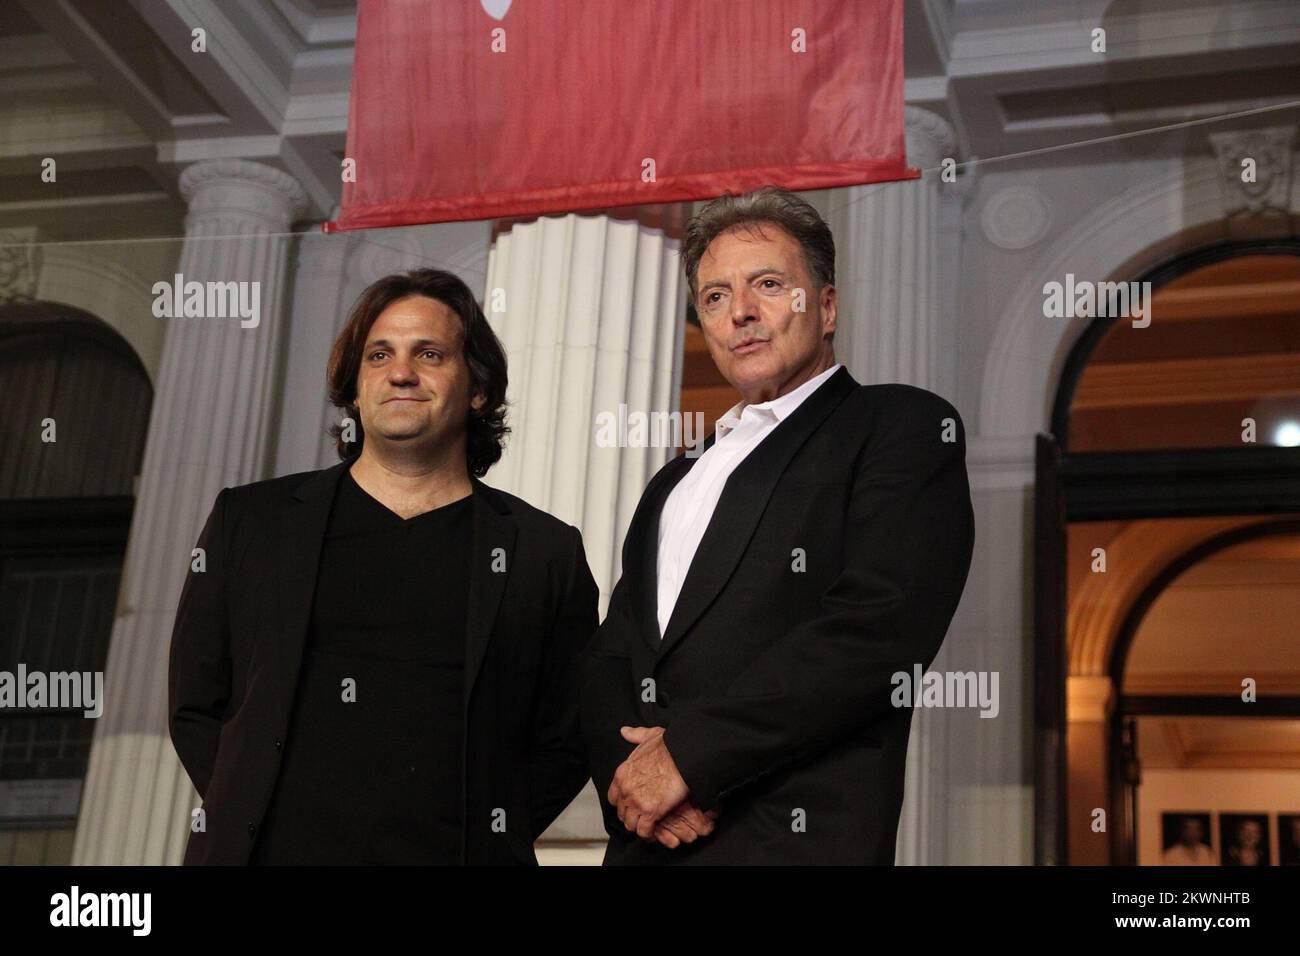 23/08/2013., Sarajevo, Bosnia and Herzegovina - Actor Armand Assante, accompanied by Croatian director Ante Novakovic on the red carpet Sarajevo Film Festival. Assante, actor in a short film Vadiona directed by  Novakovic, greeted the audience and gave them kisses. Photo: HaloPix / PIXSELL Stock Photo